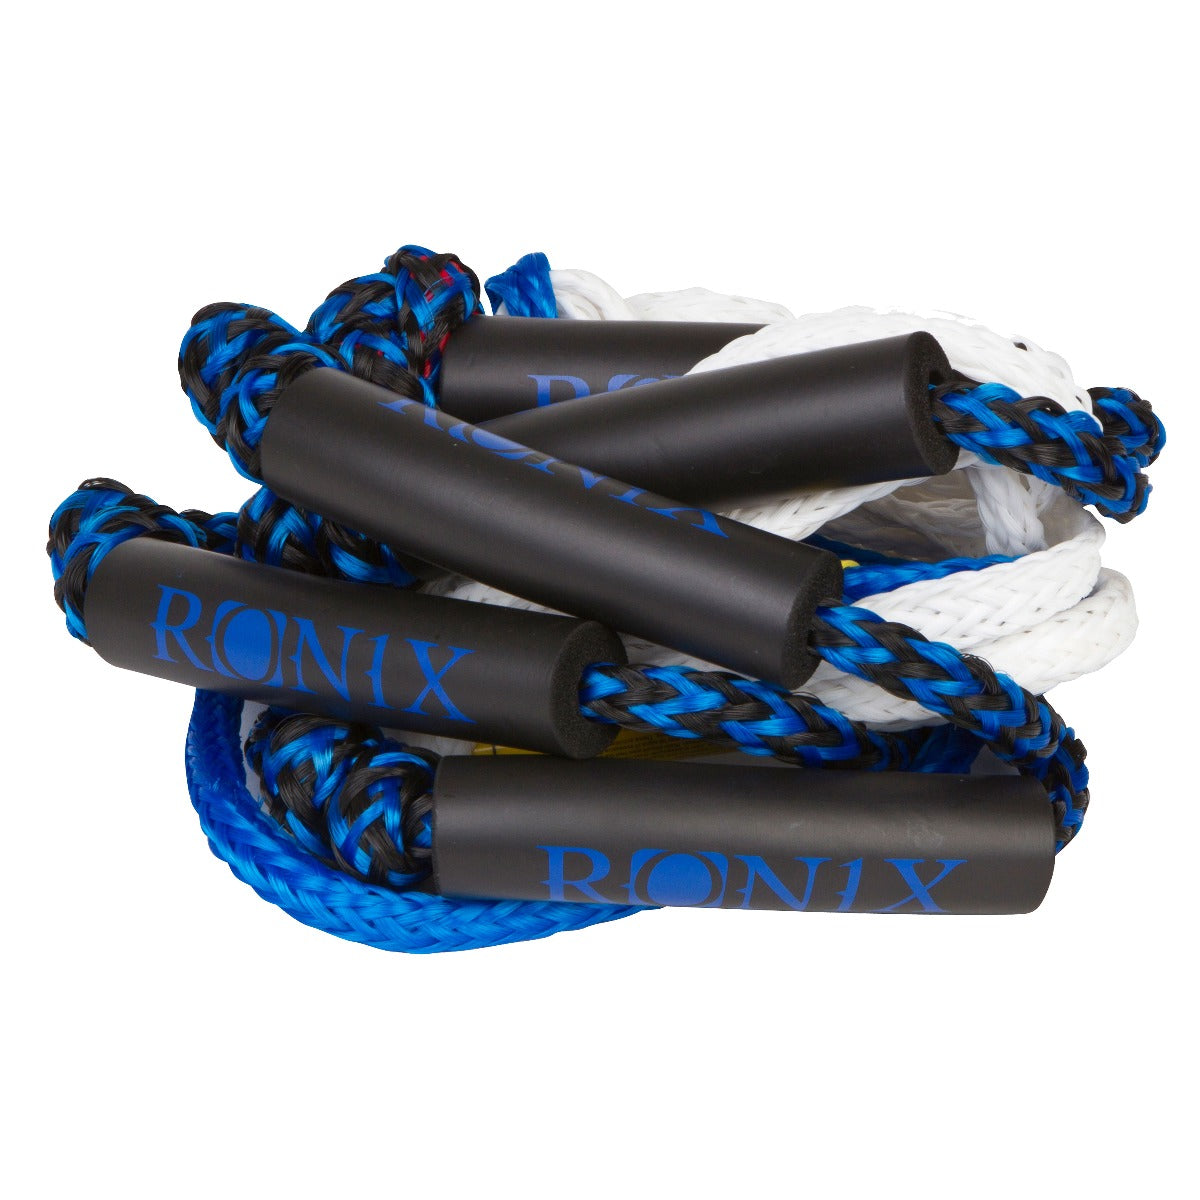 An assortment of Ronix Surf Rope with foam floats, all labeled with the word "ronx".